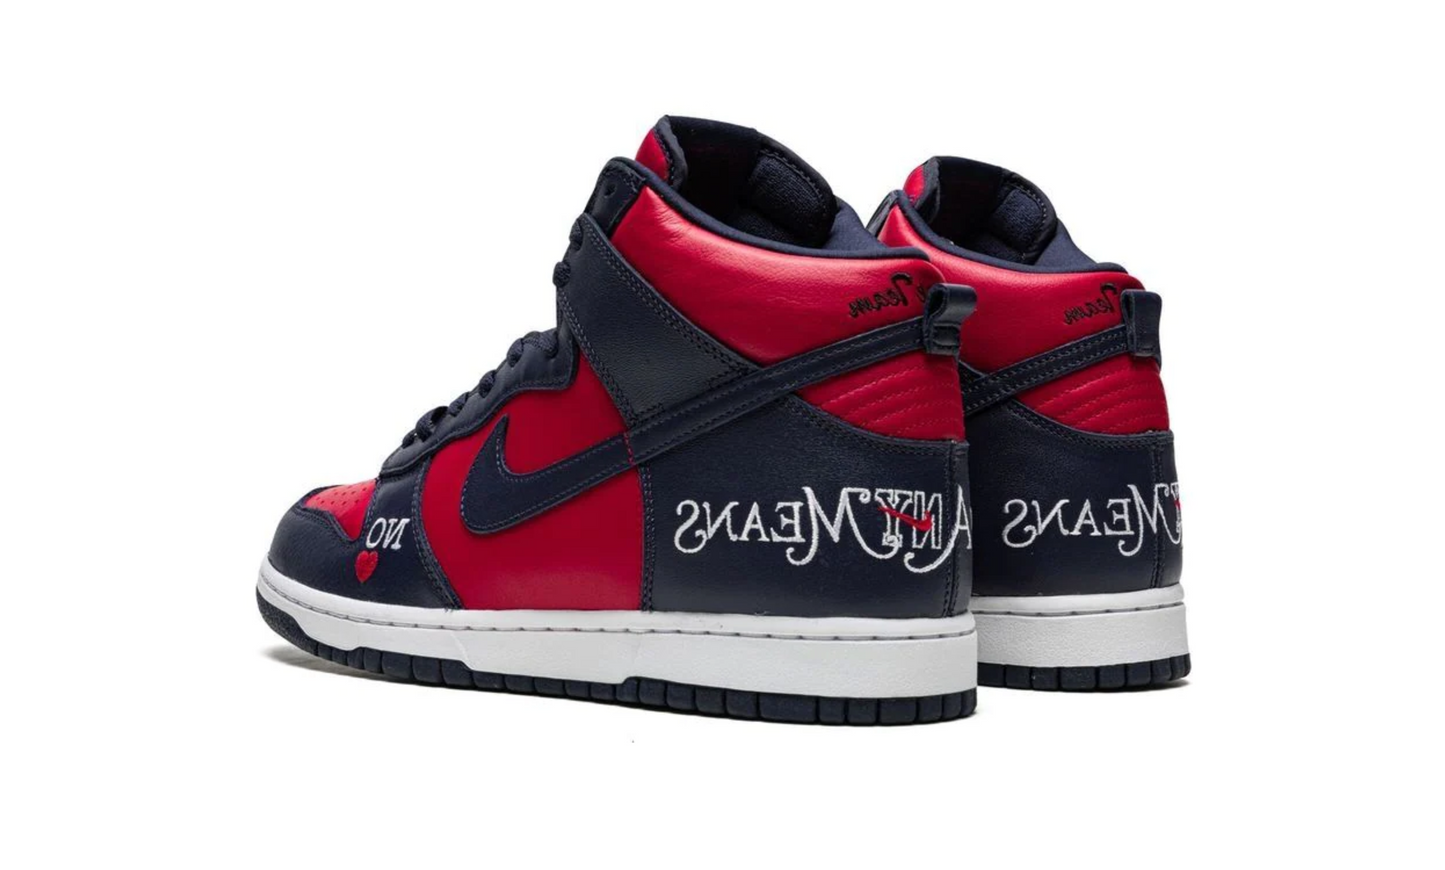 Nike SB Dunk High Supreme By Any Means Navy Red